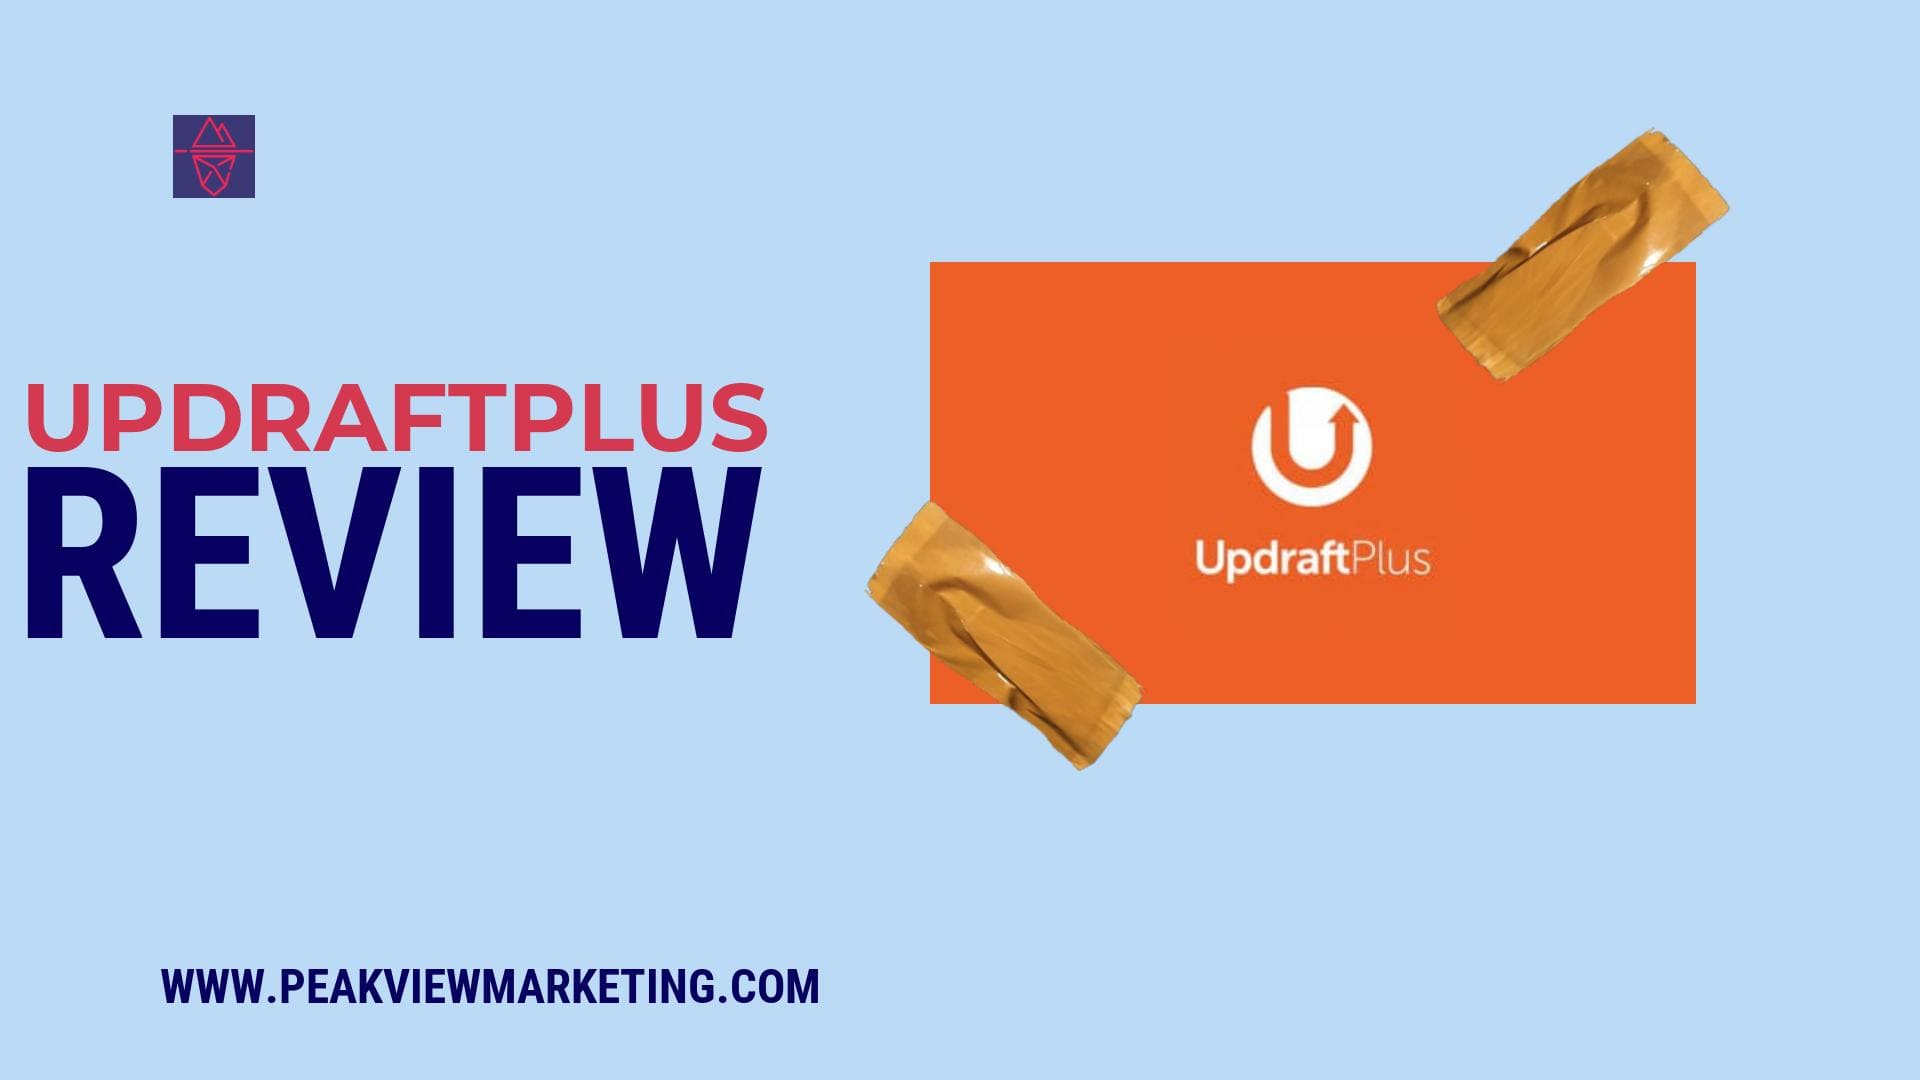 UpdraftPlus Review Image